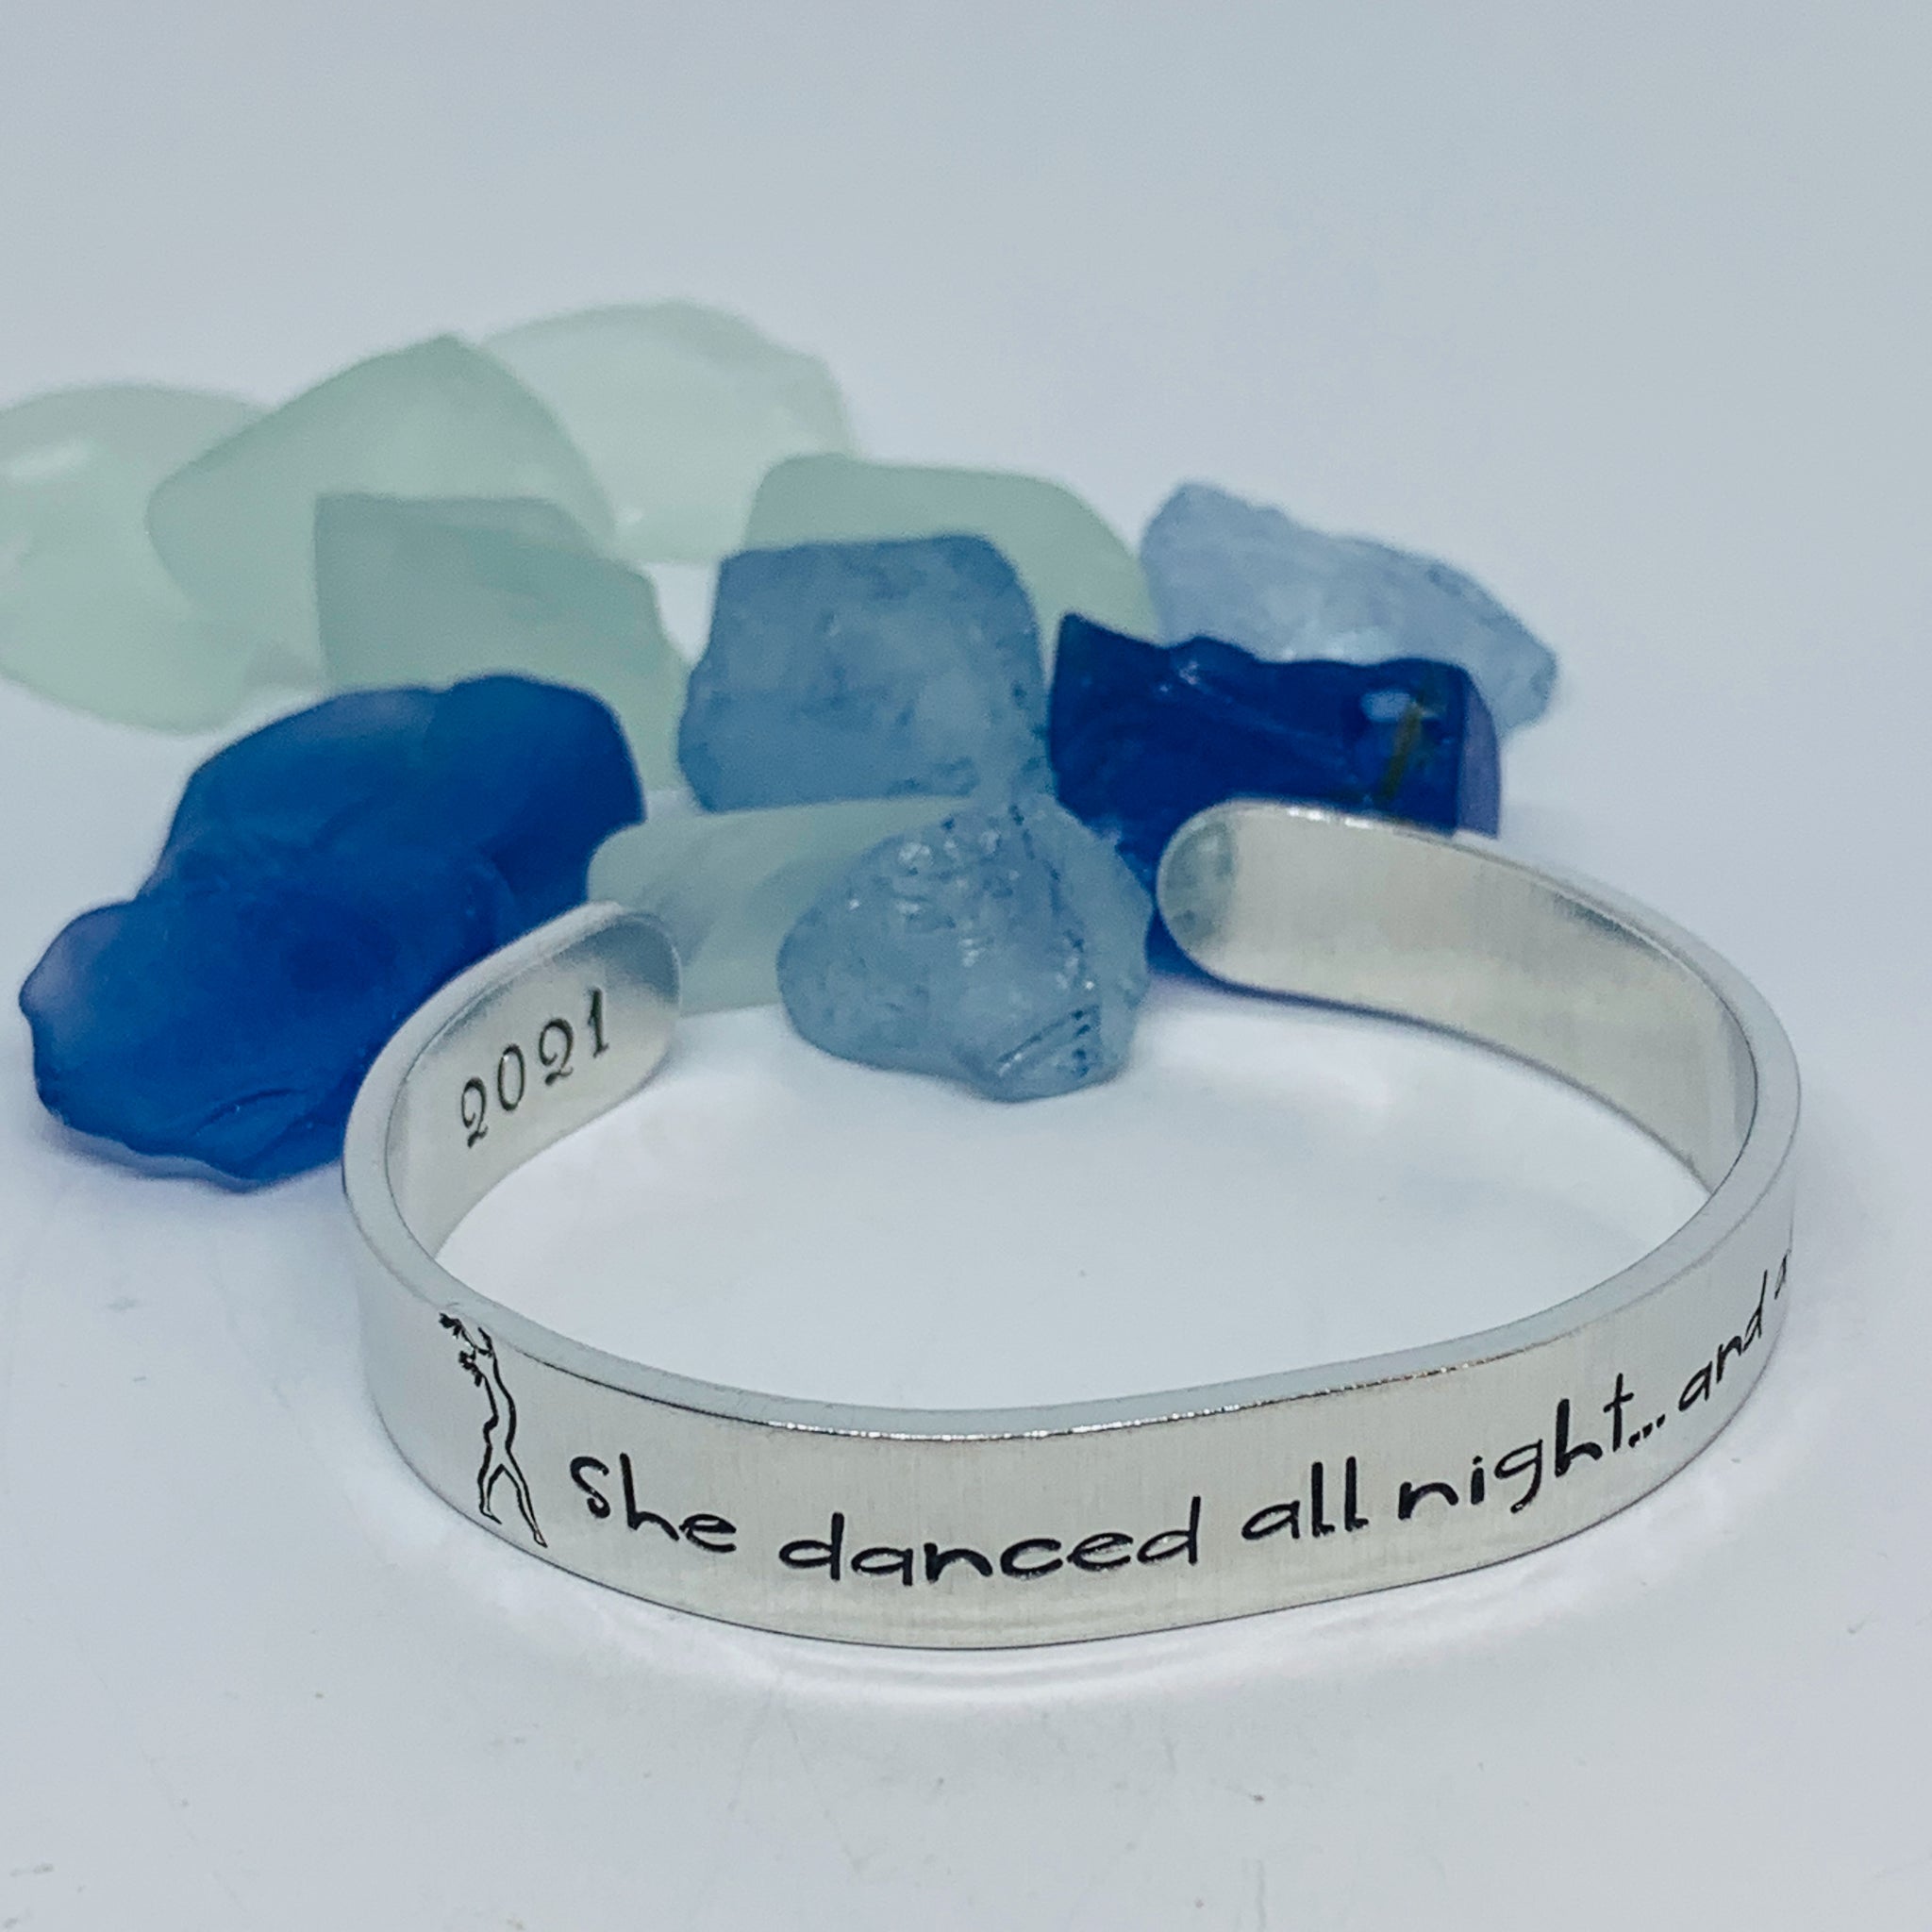 She danced all night ... and all the way home - Hand Stamped Metal Cuff Bracelet | Gift for Her | Ballerina Gift | Gift for Dancer